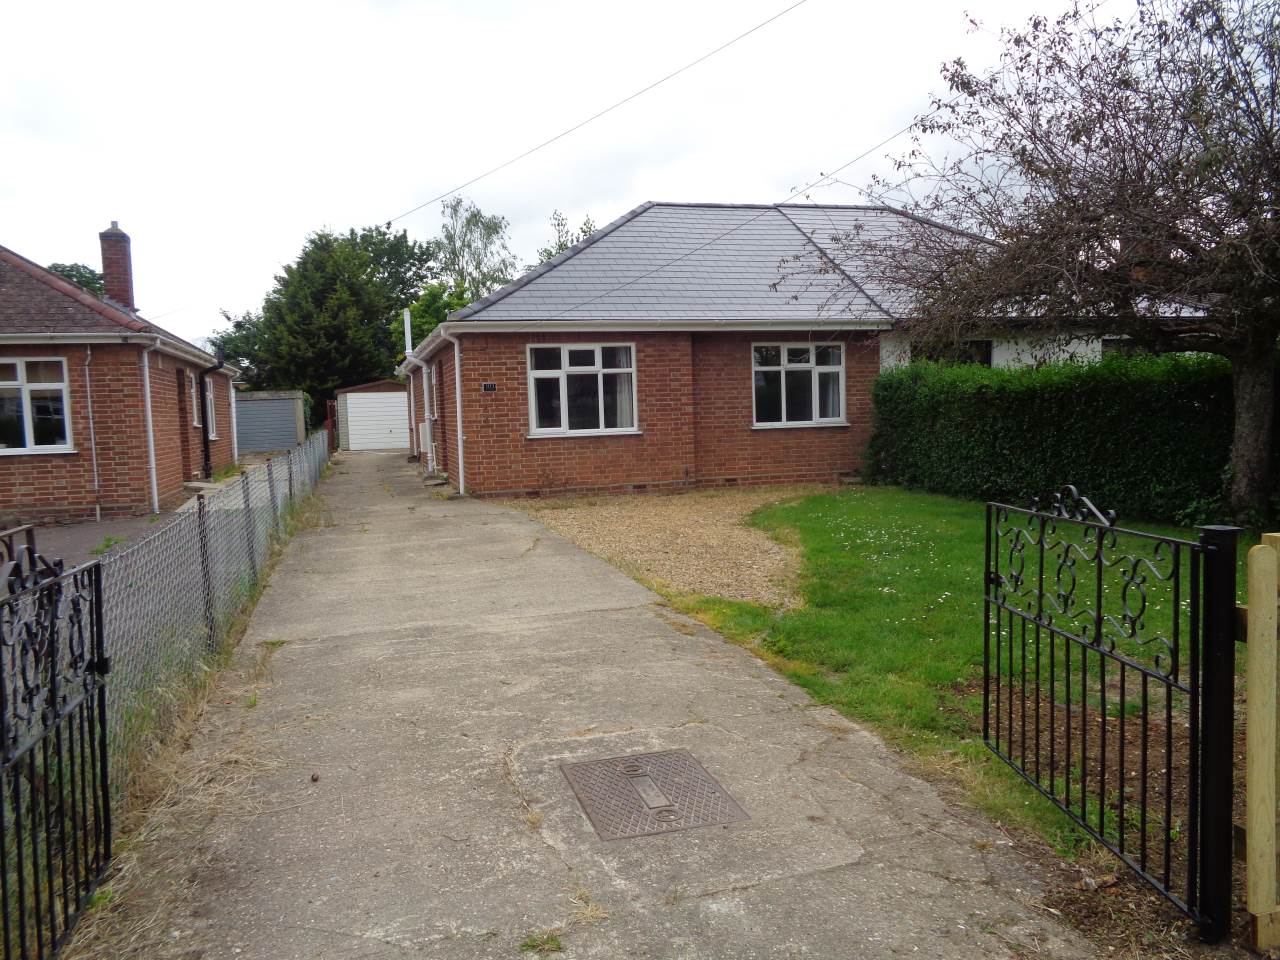 2 bed House (unspecified) for rent in Comberton. From Lets Rent Cambridge